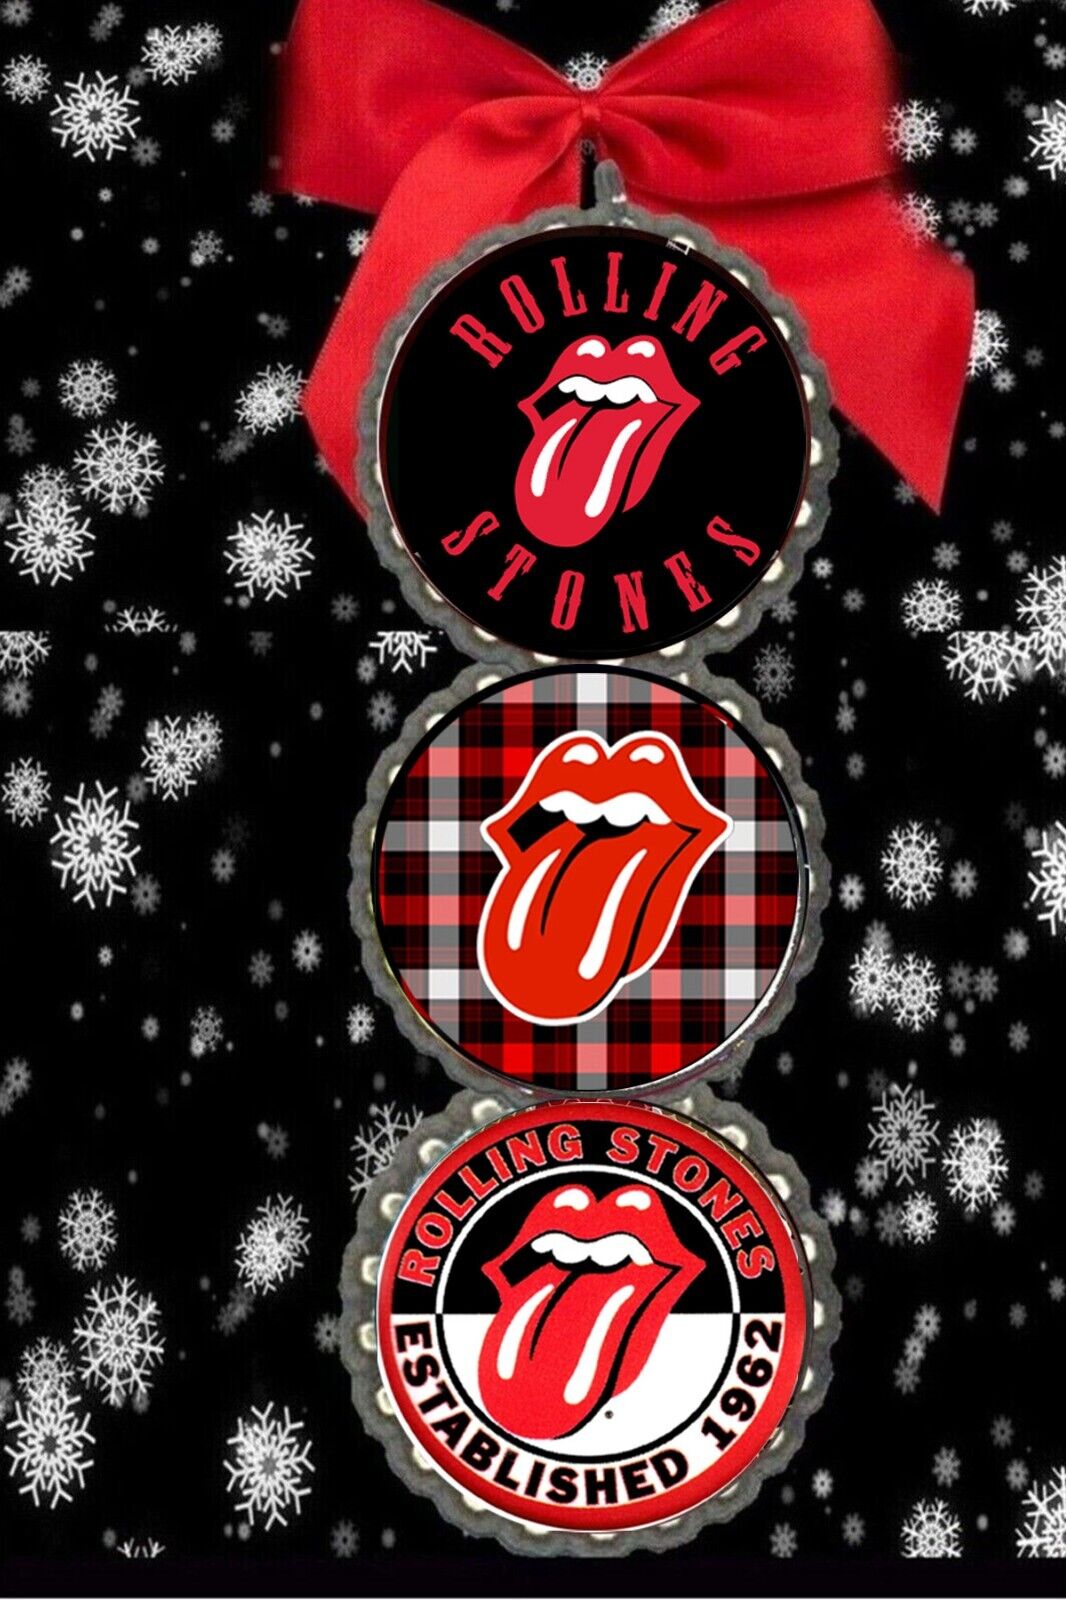 Rolling stones Christmas ornament holiday decorations